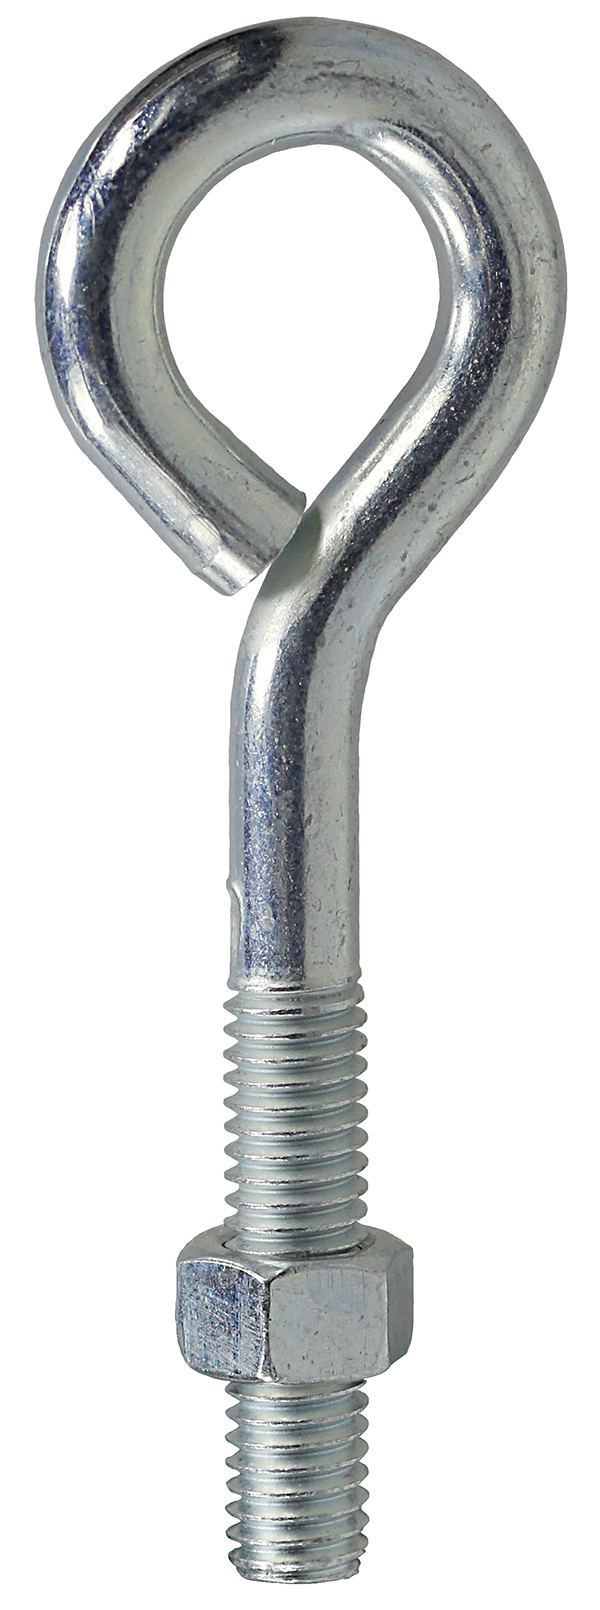 Eye Bolt, Low Carbon Cold Drawn Steel material, Zinc Plated Finish, 2 in. length, 3/16 in. diameter, NC Rolled Machine thread, 1 nut, Hex nut type, 1-1/4 in. thread length, 1-3/8 in. shank length, 3/16 in. thread size, 5/16 in. inside diameter